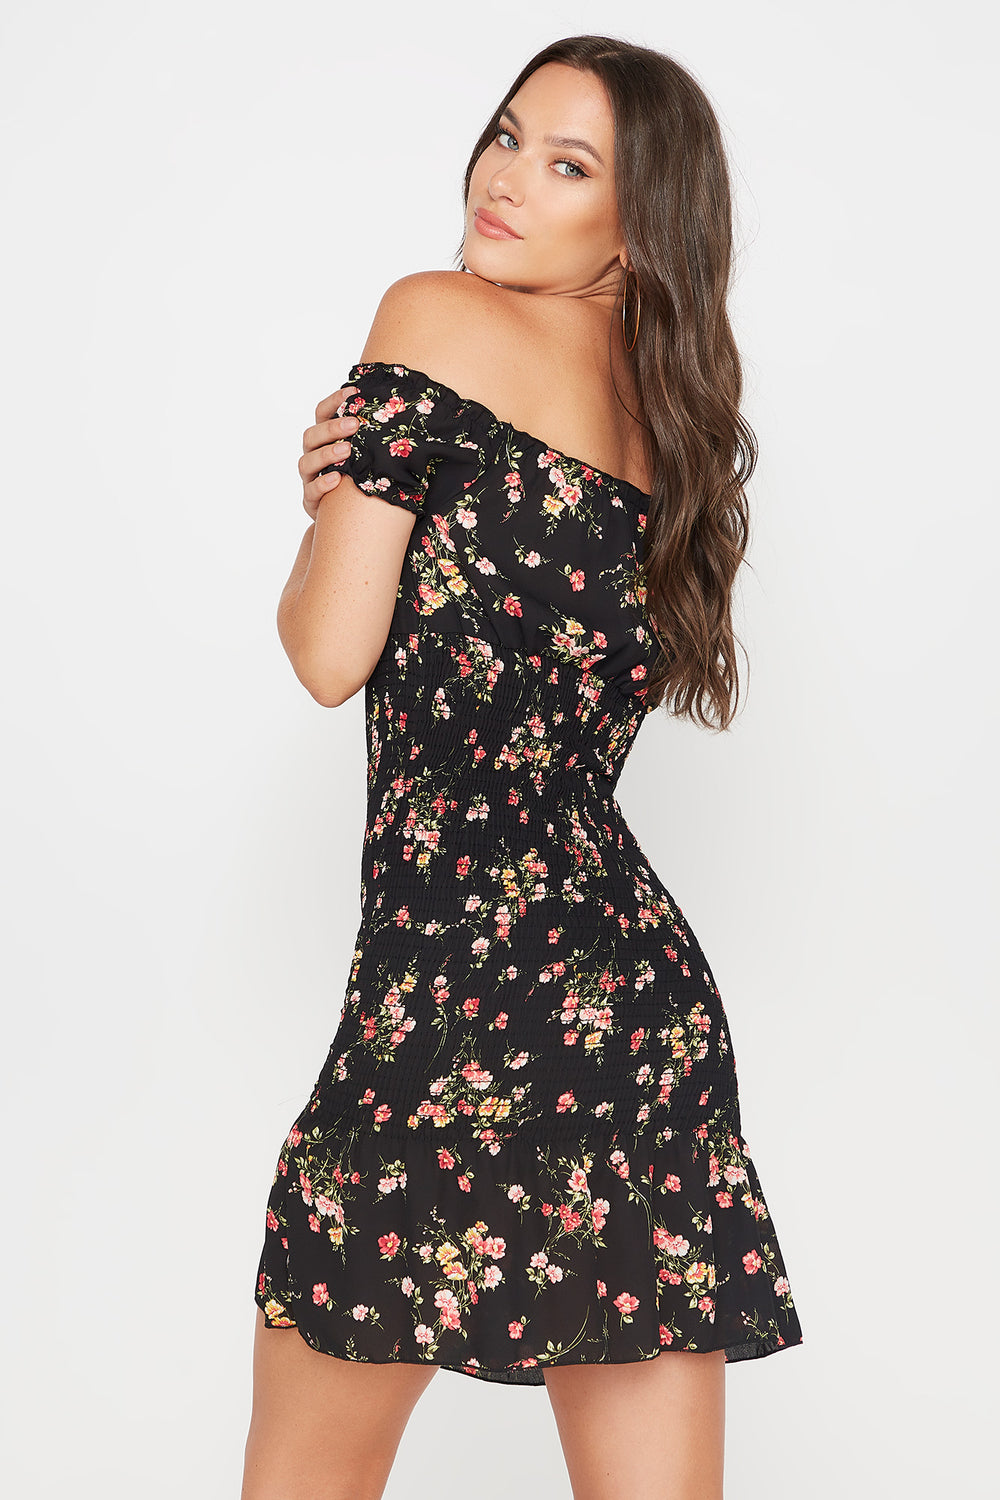 dresses at charlotte russe